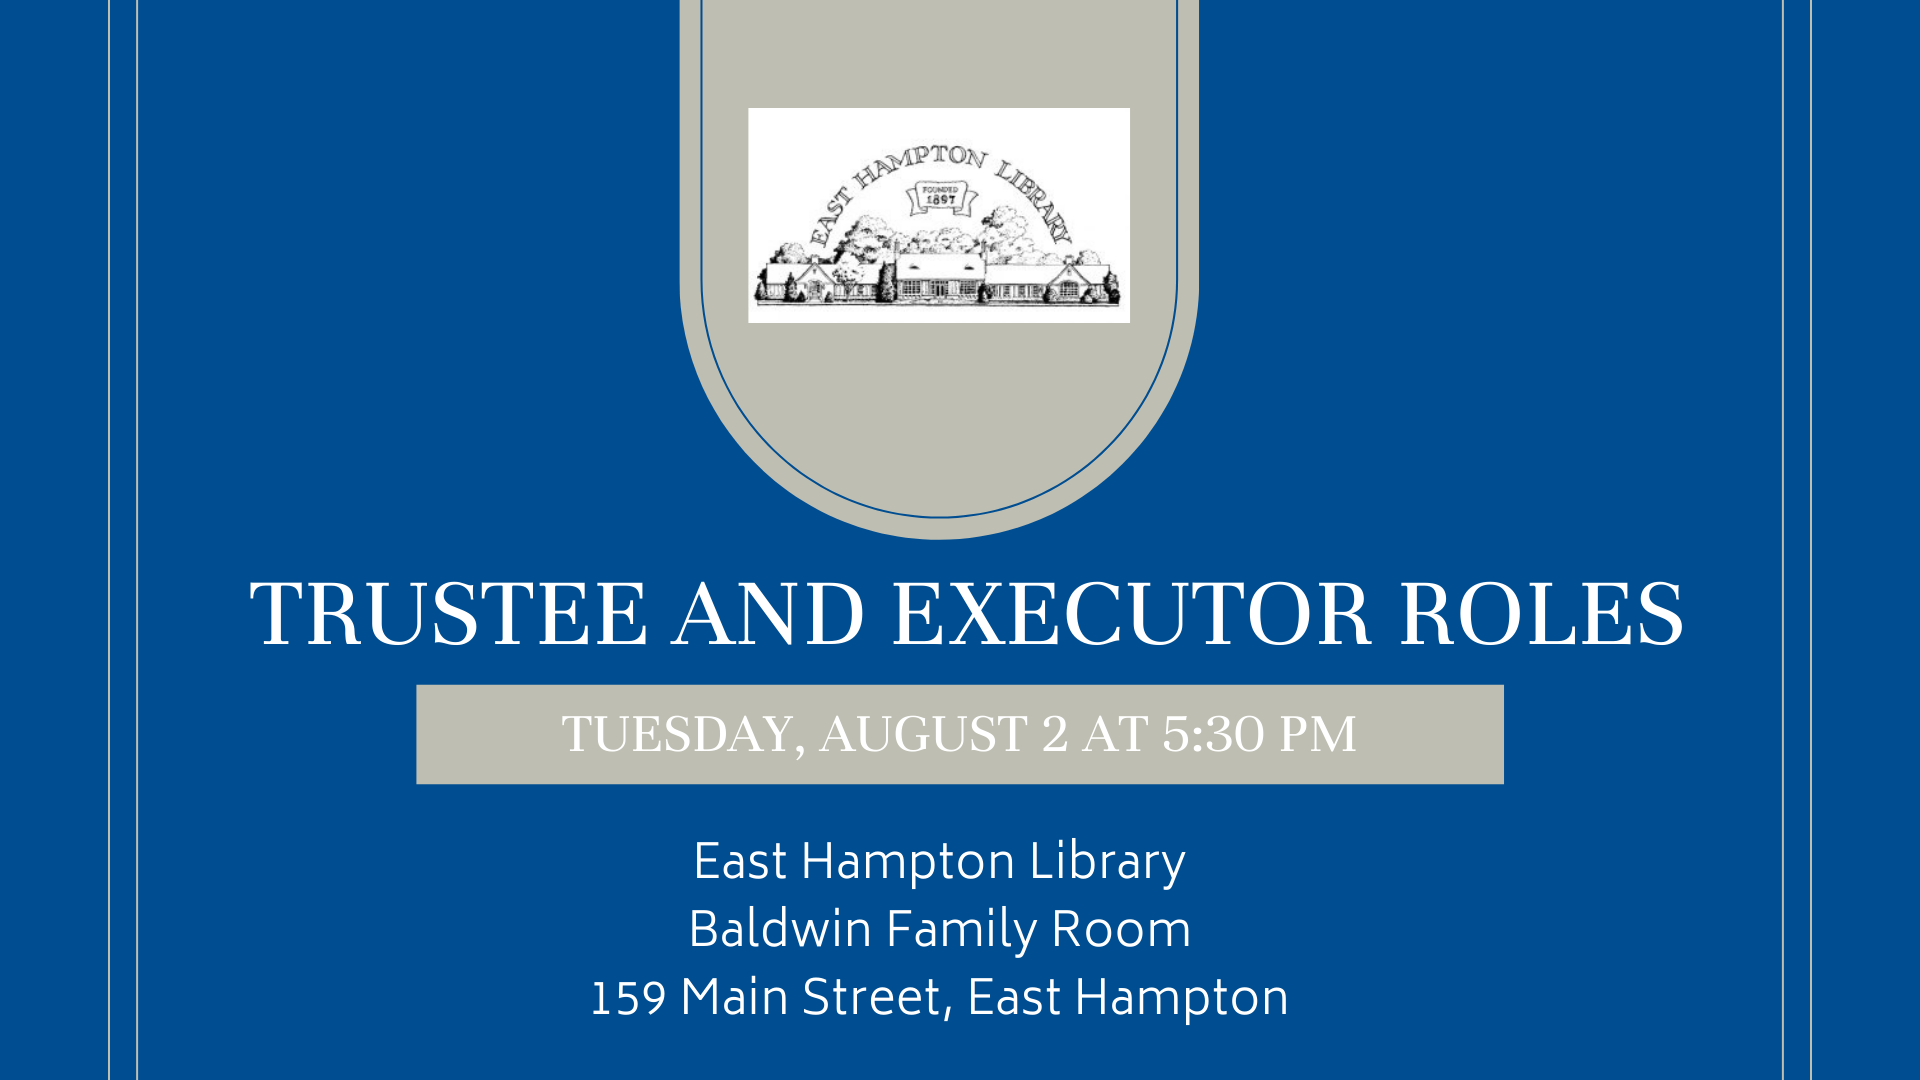 Trustee and Executor Roles Dan’s Papers